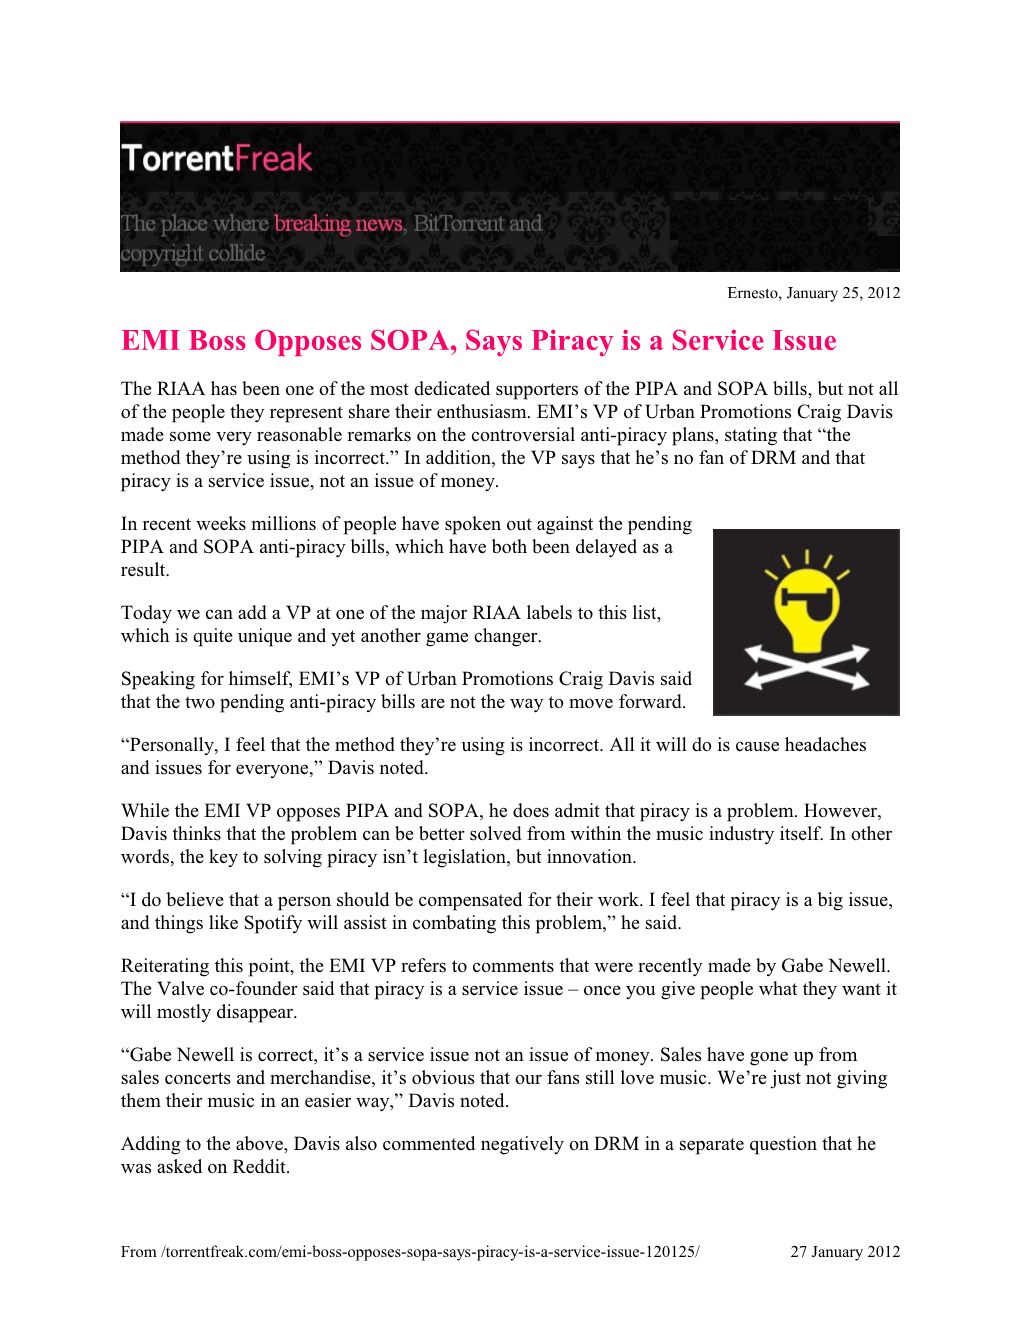 EMI Boss Opposes SOPA, Says Piracy Is a Service Issue